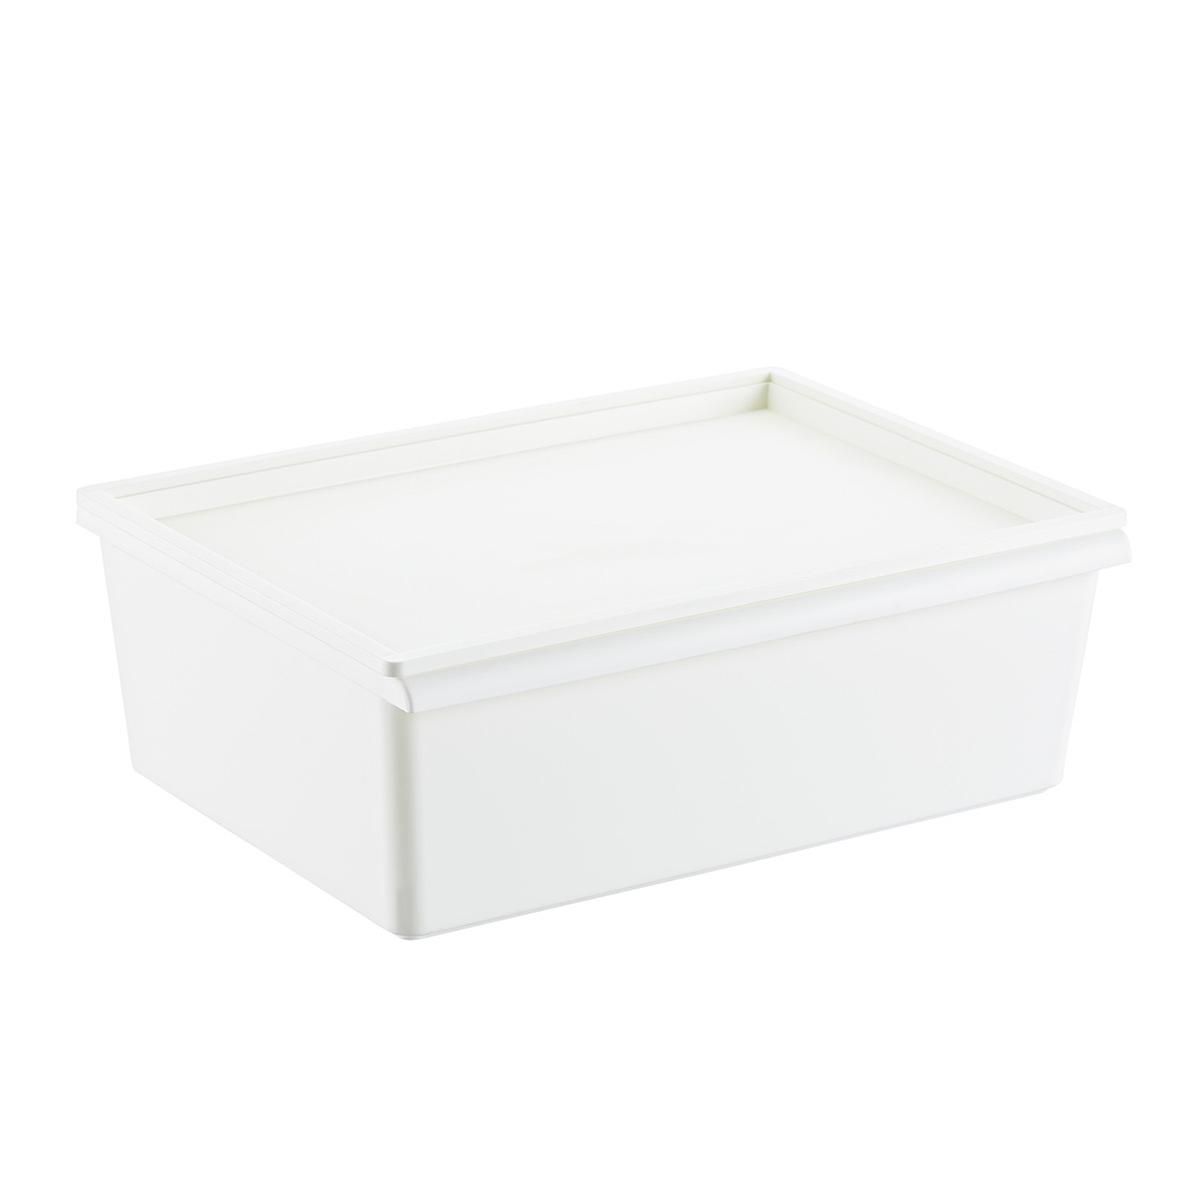 White Plastic Stacking Bins with Lids | The Container Store